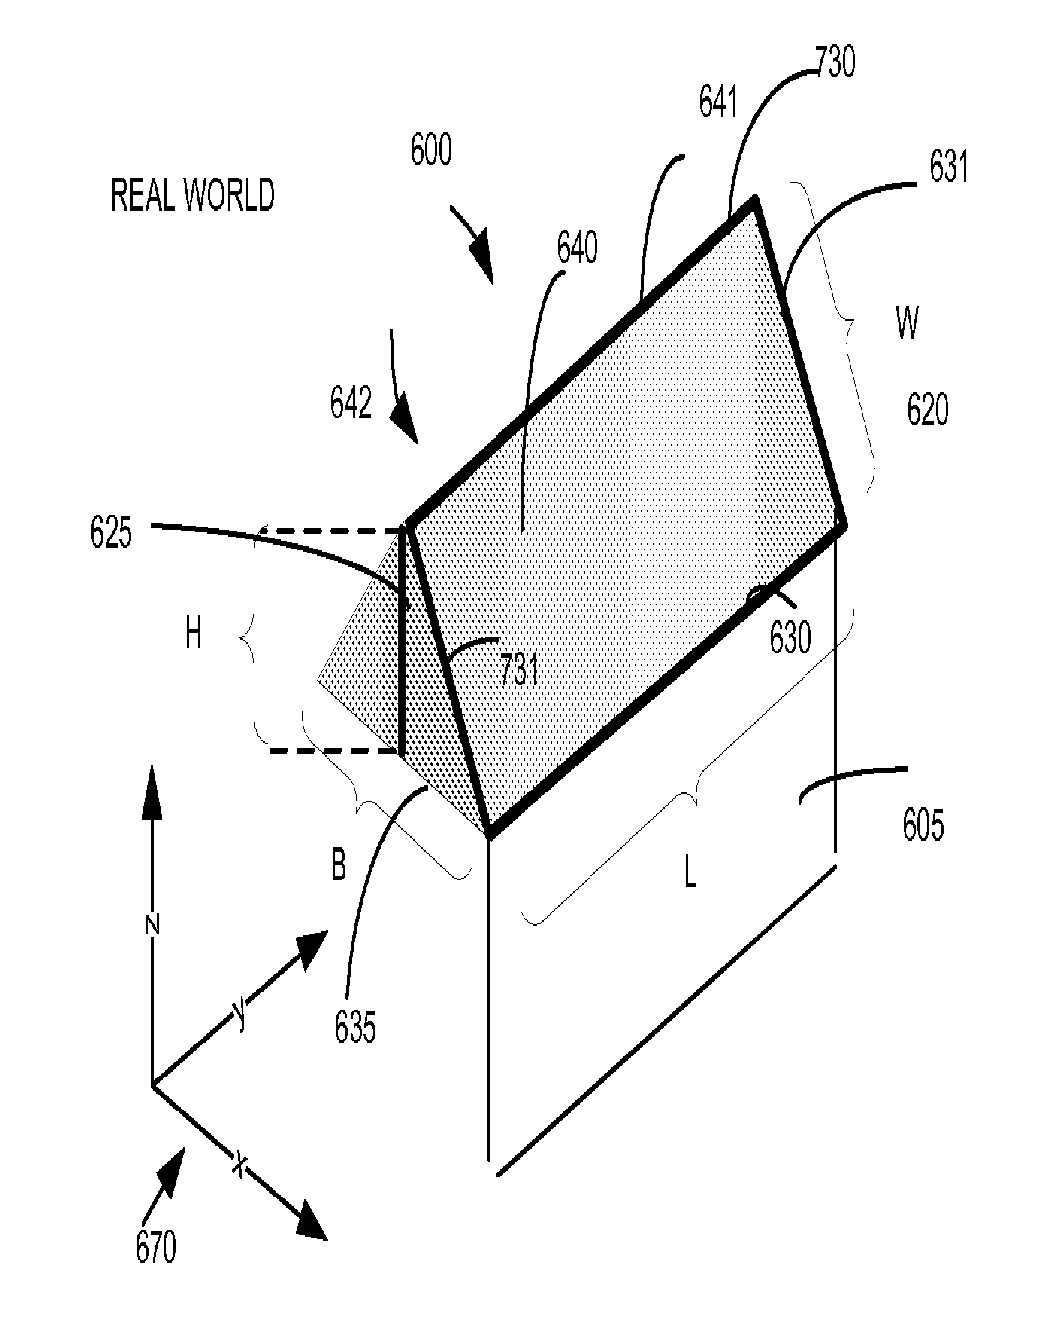 System and Method for Provisioning Energy Systems